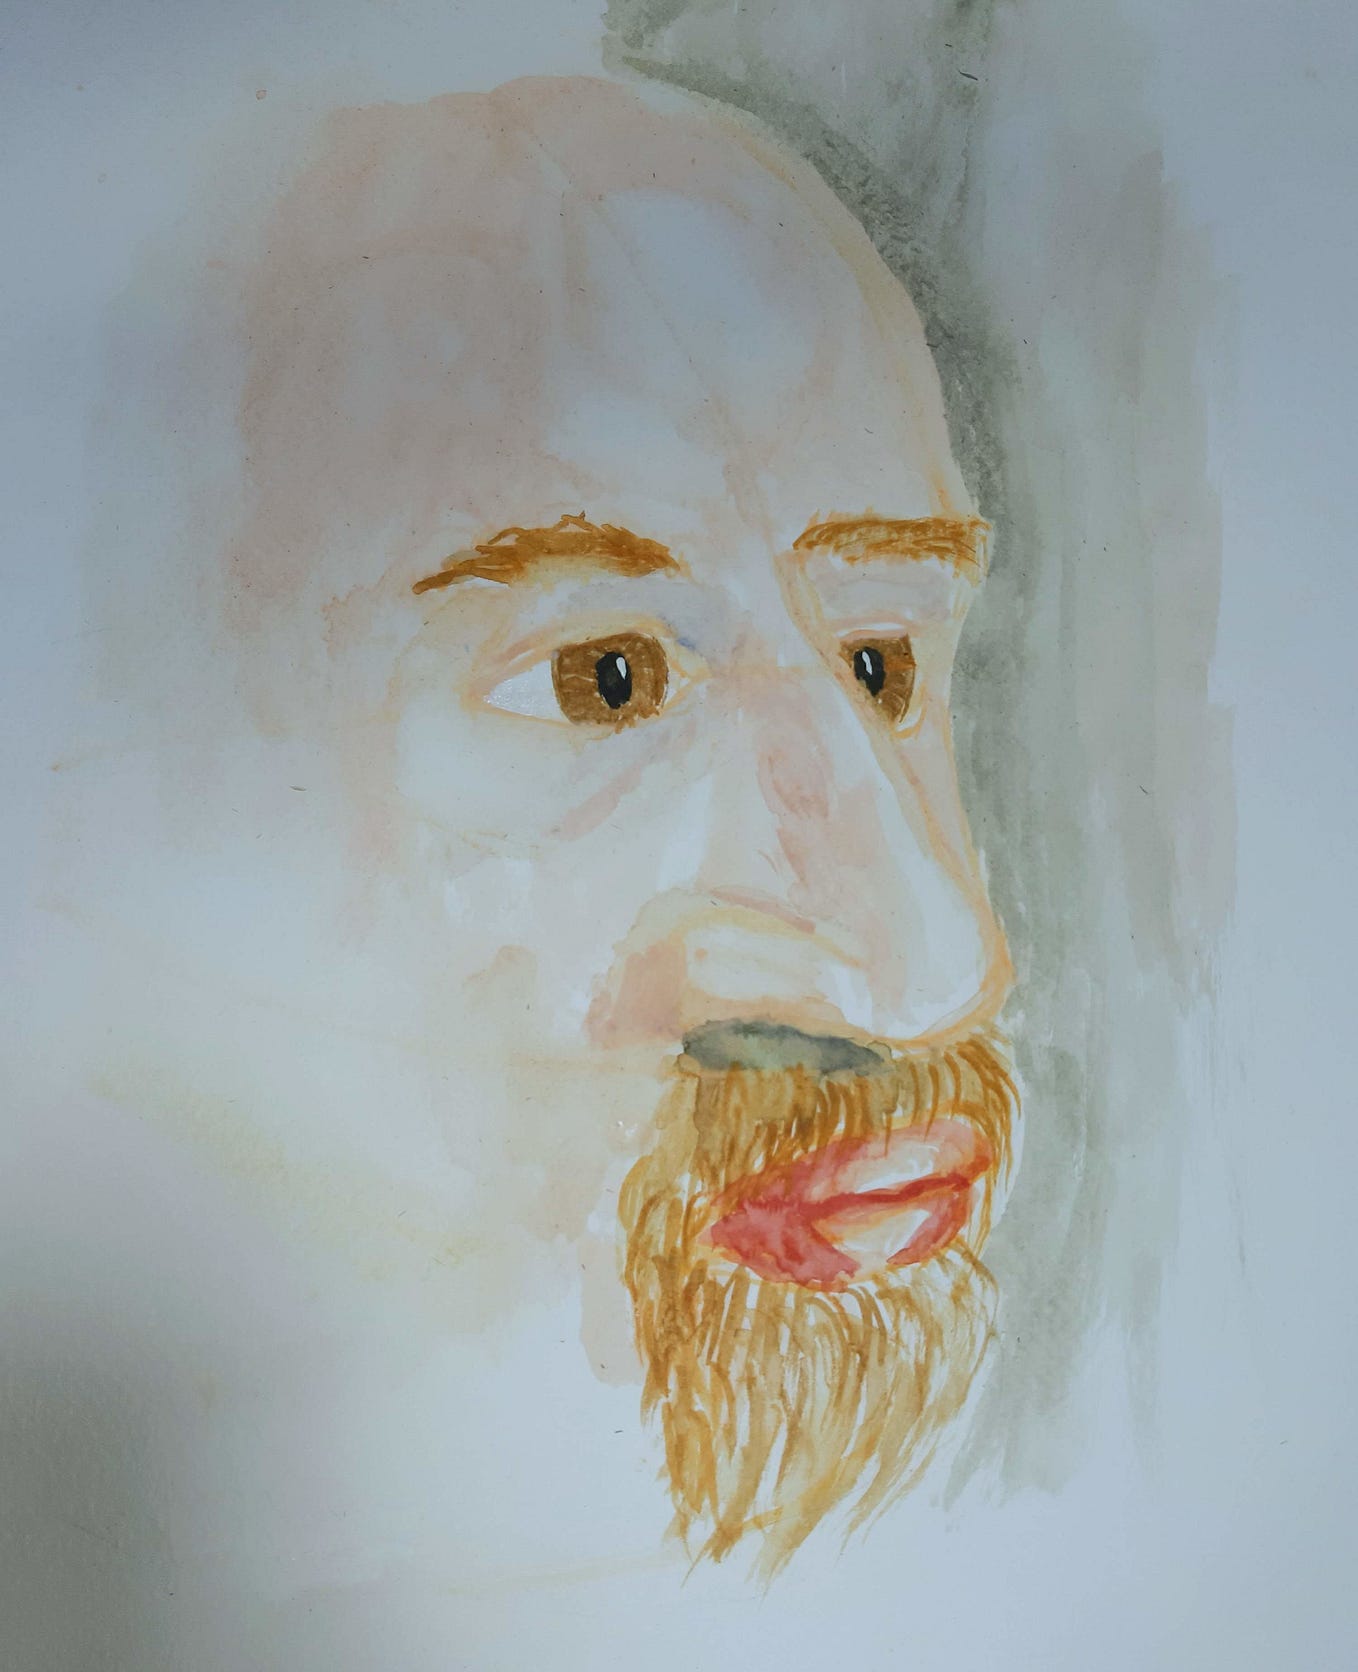 A watercolour self-portraint of myself in three quarter view. In hindsight, the features are noticeably exaggerated.